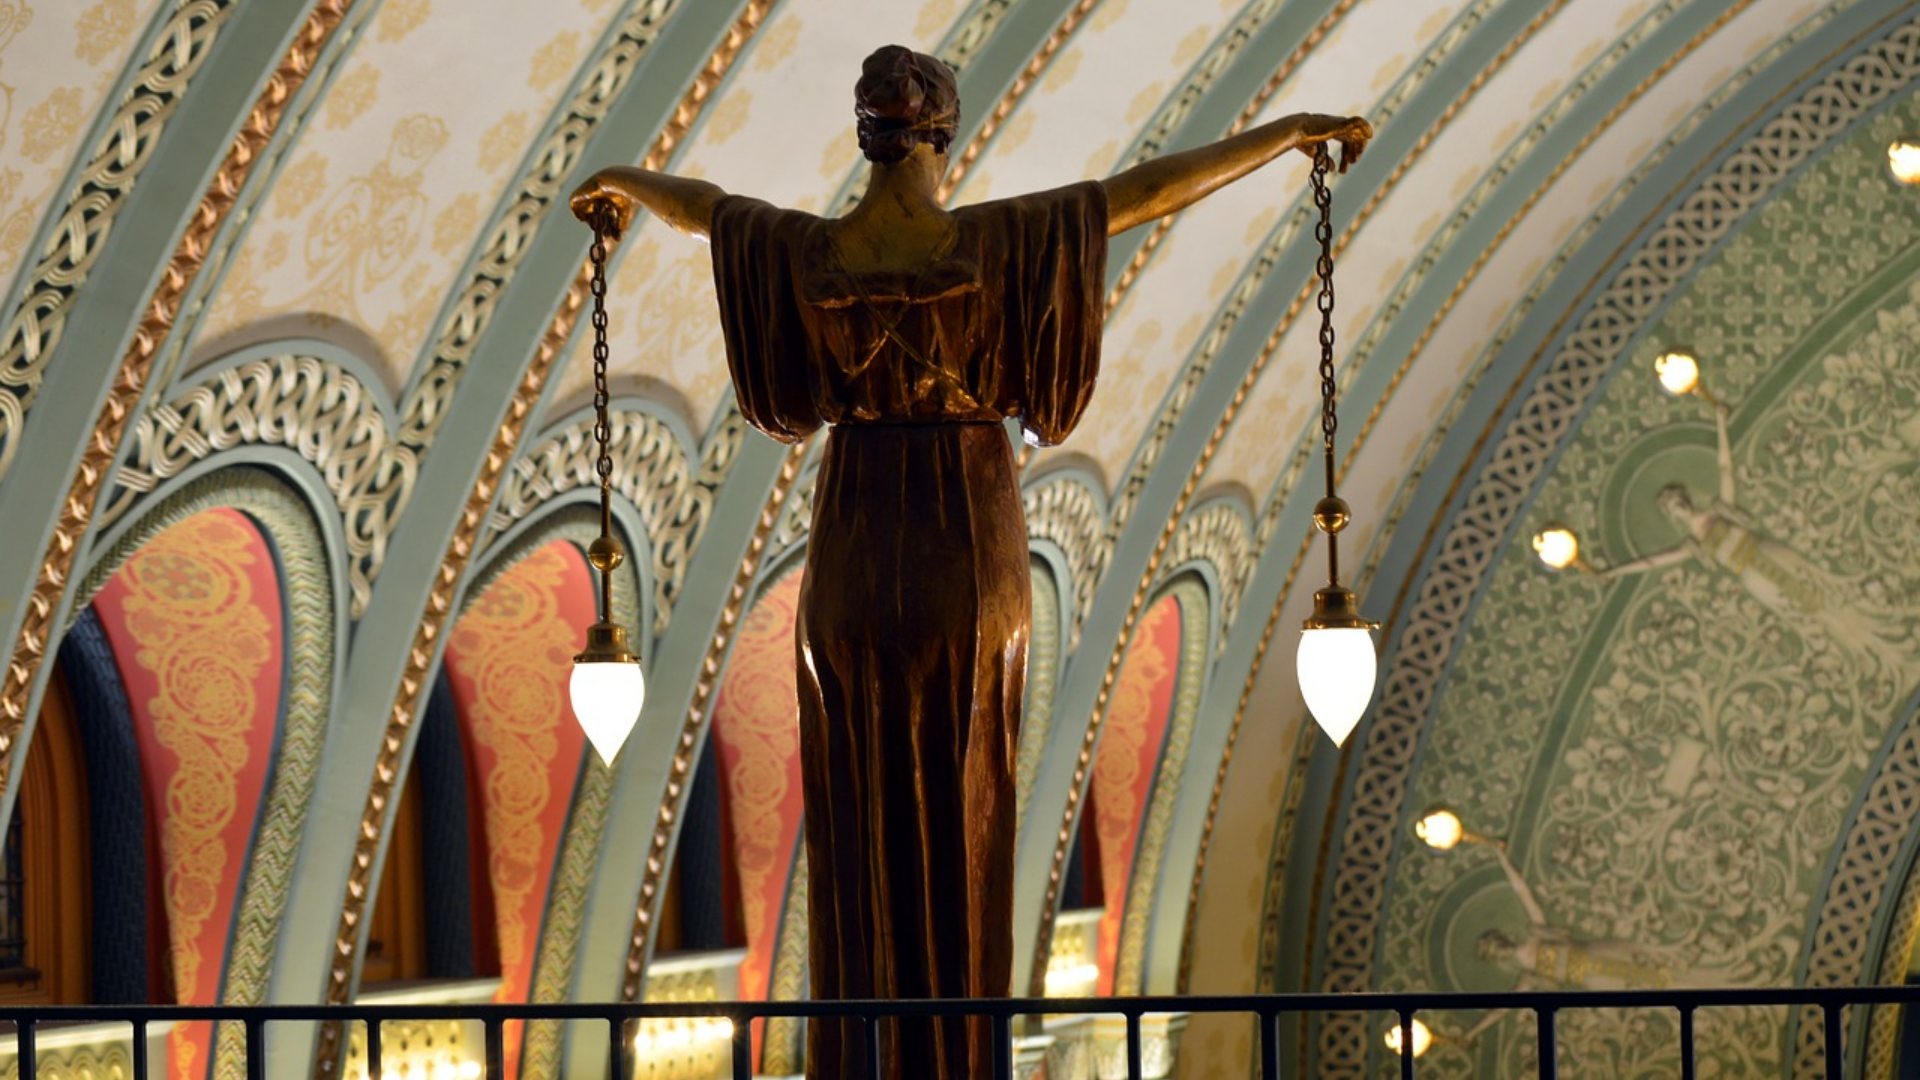 Statue in St. Louis Union Station